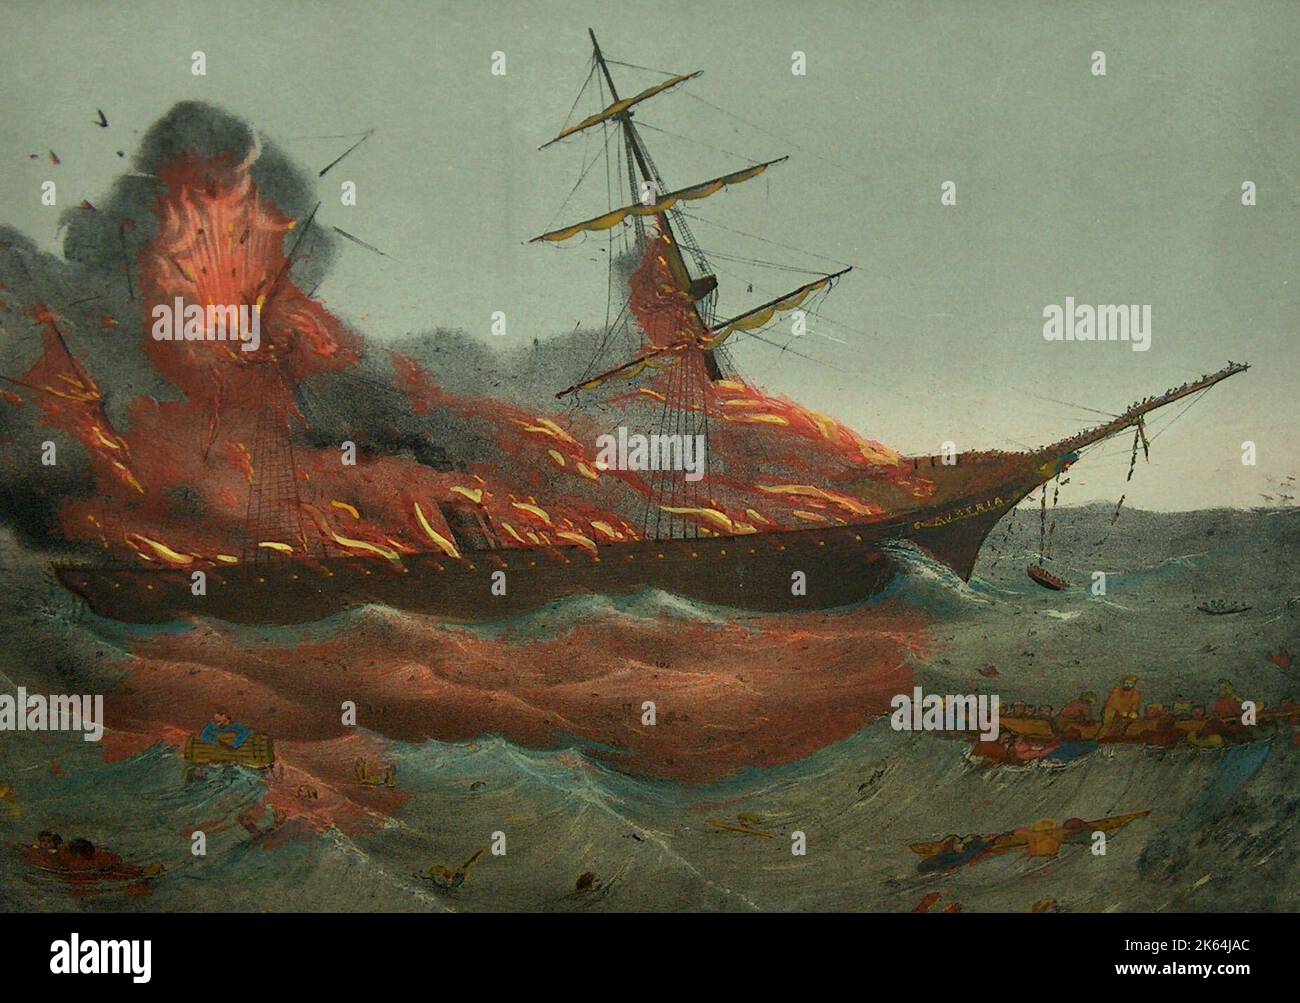 The Steamship SS Austria on fire on September 13, 1858 - the disaster saw 453 people drown with only 84 survivors.     Date: 1858 Stock Photo